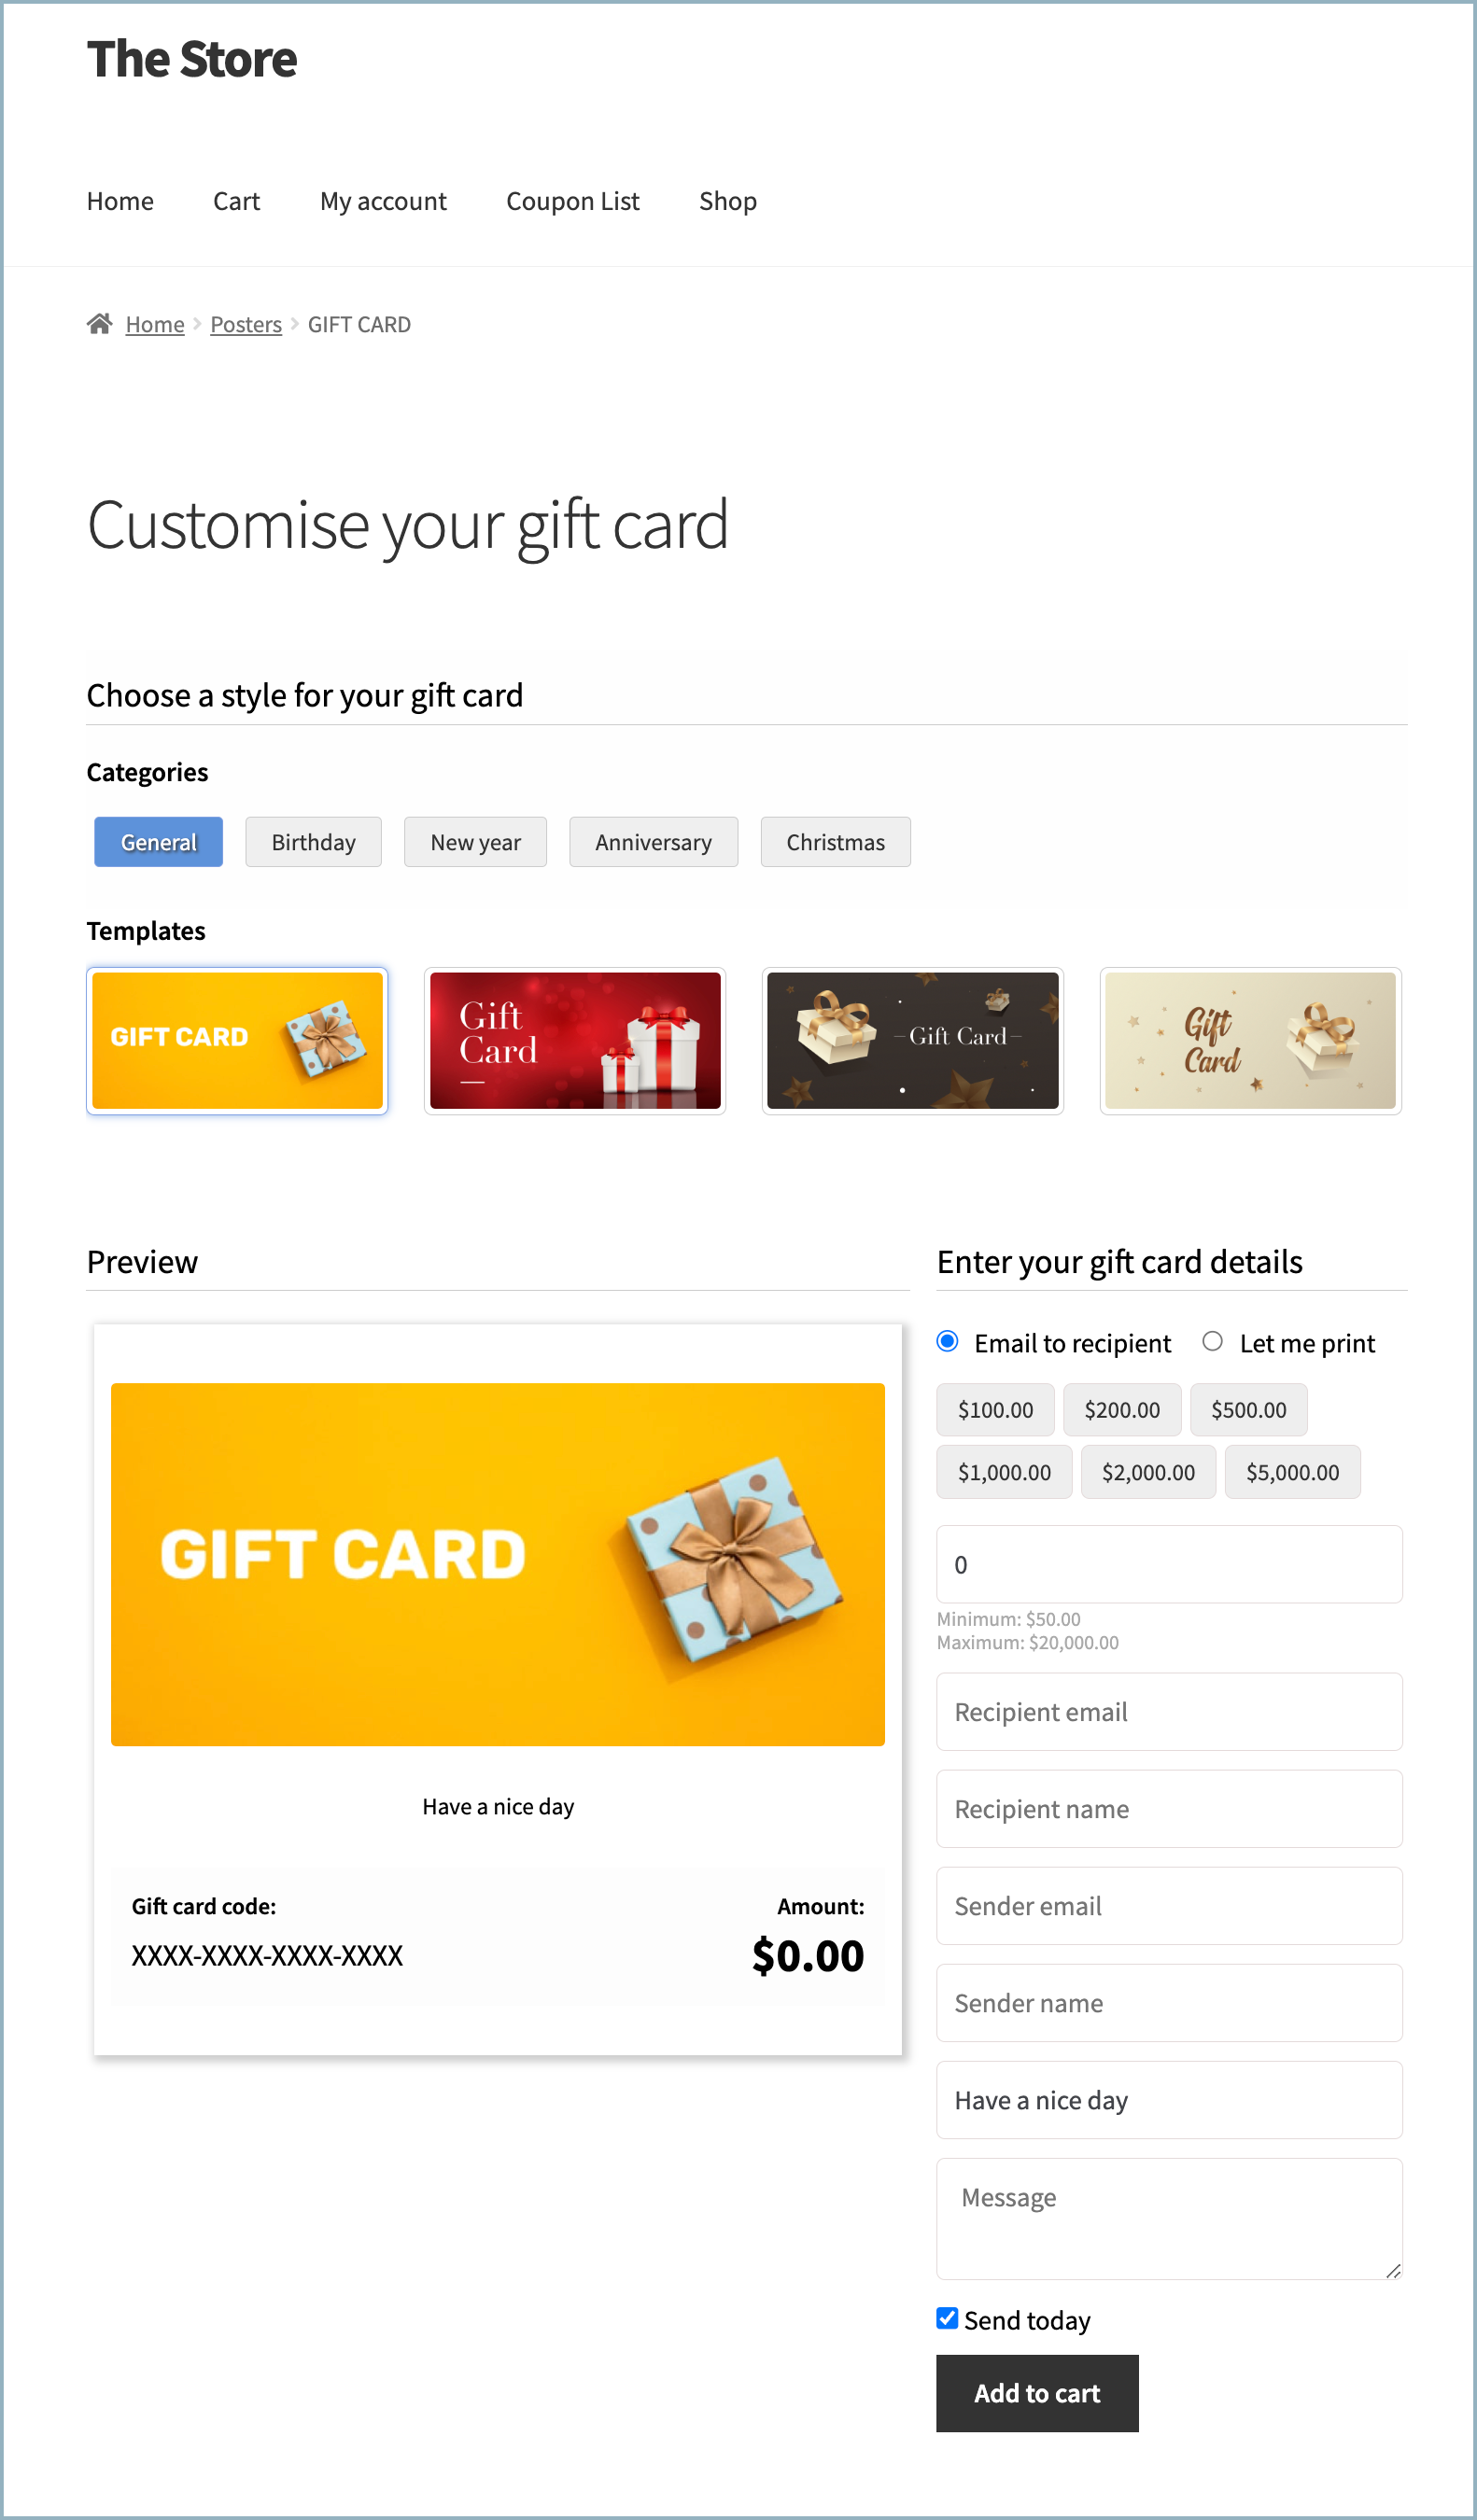 Gift card product in store
